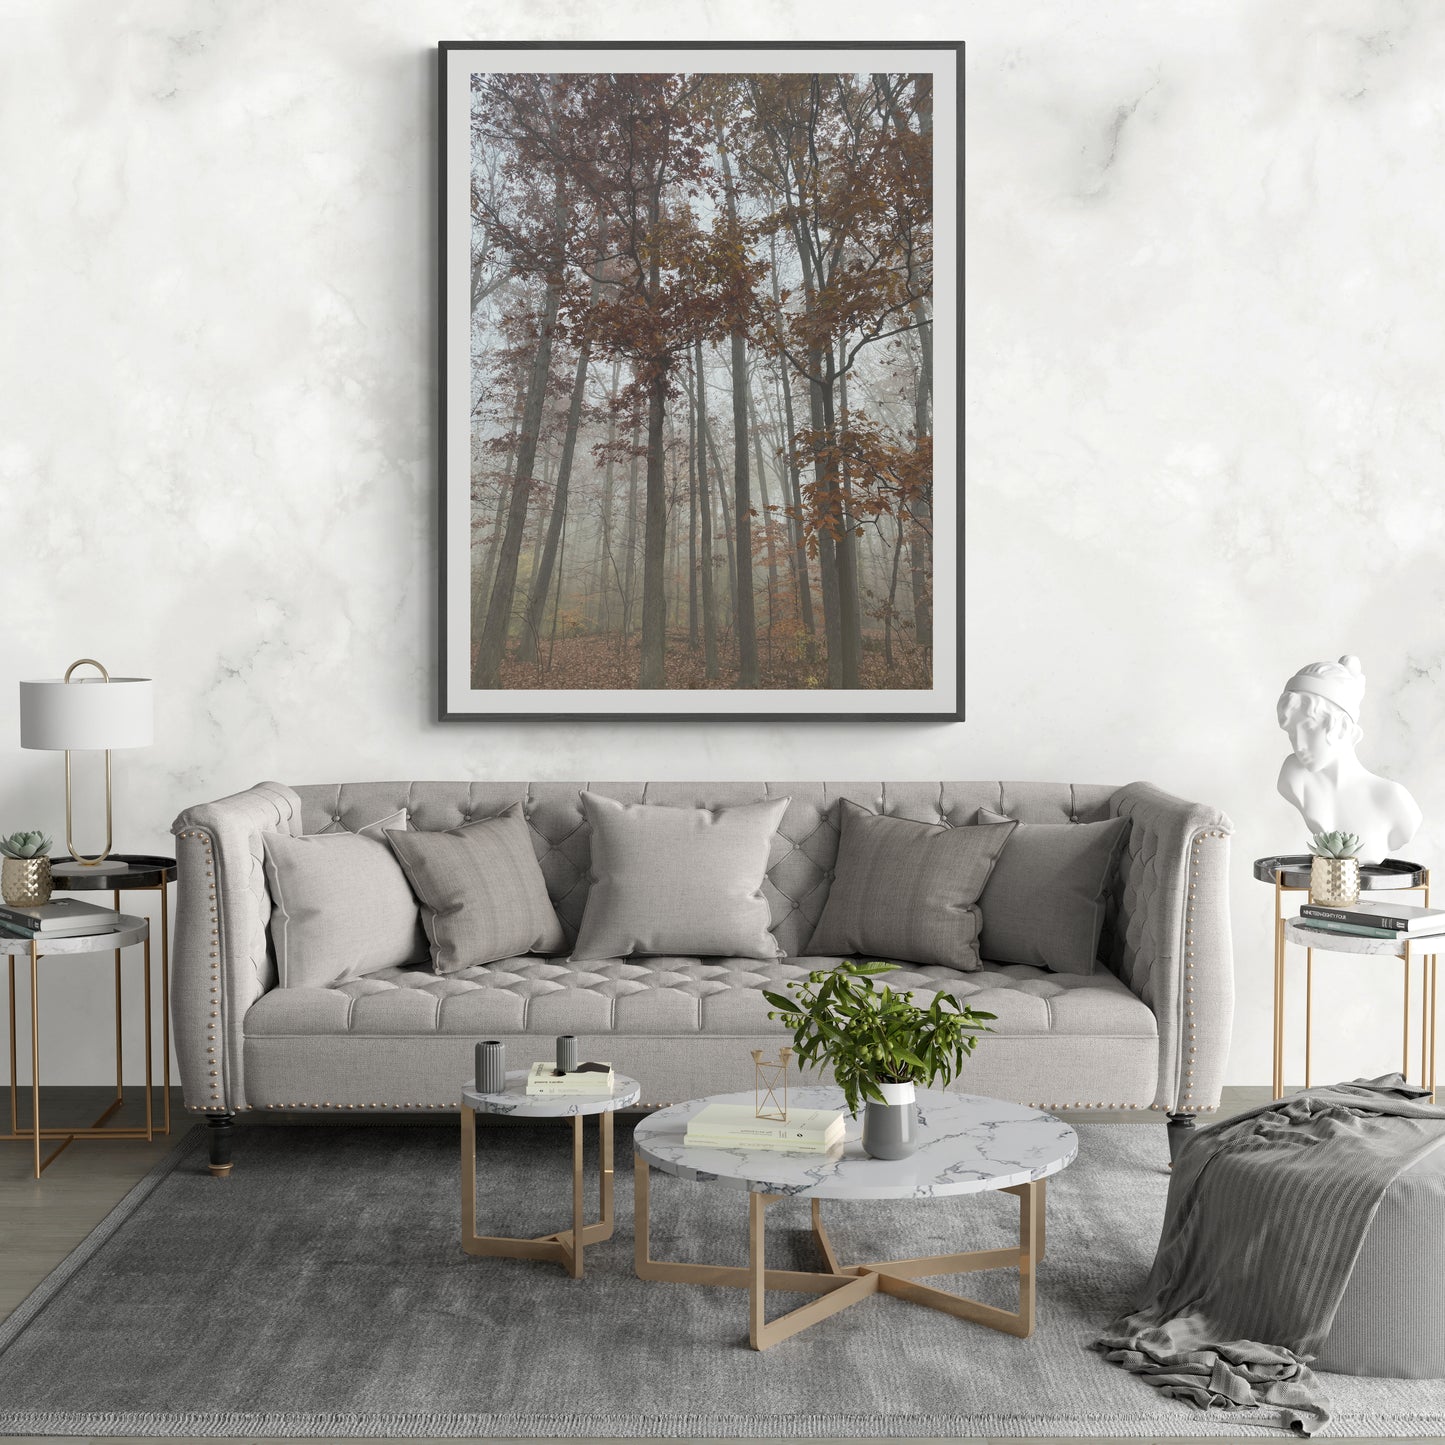 Tall Trees in the Misty Fog, Photographic Print